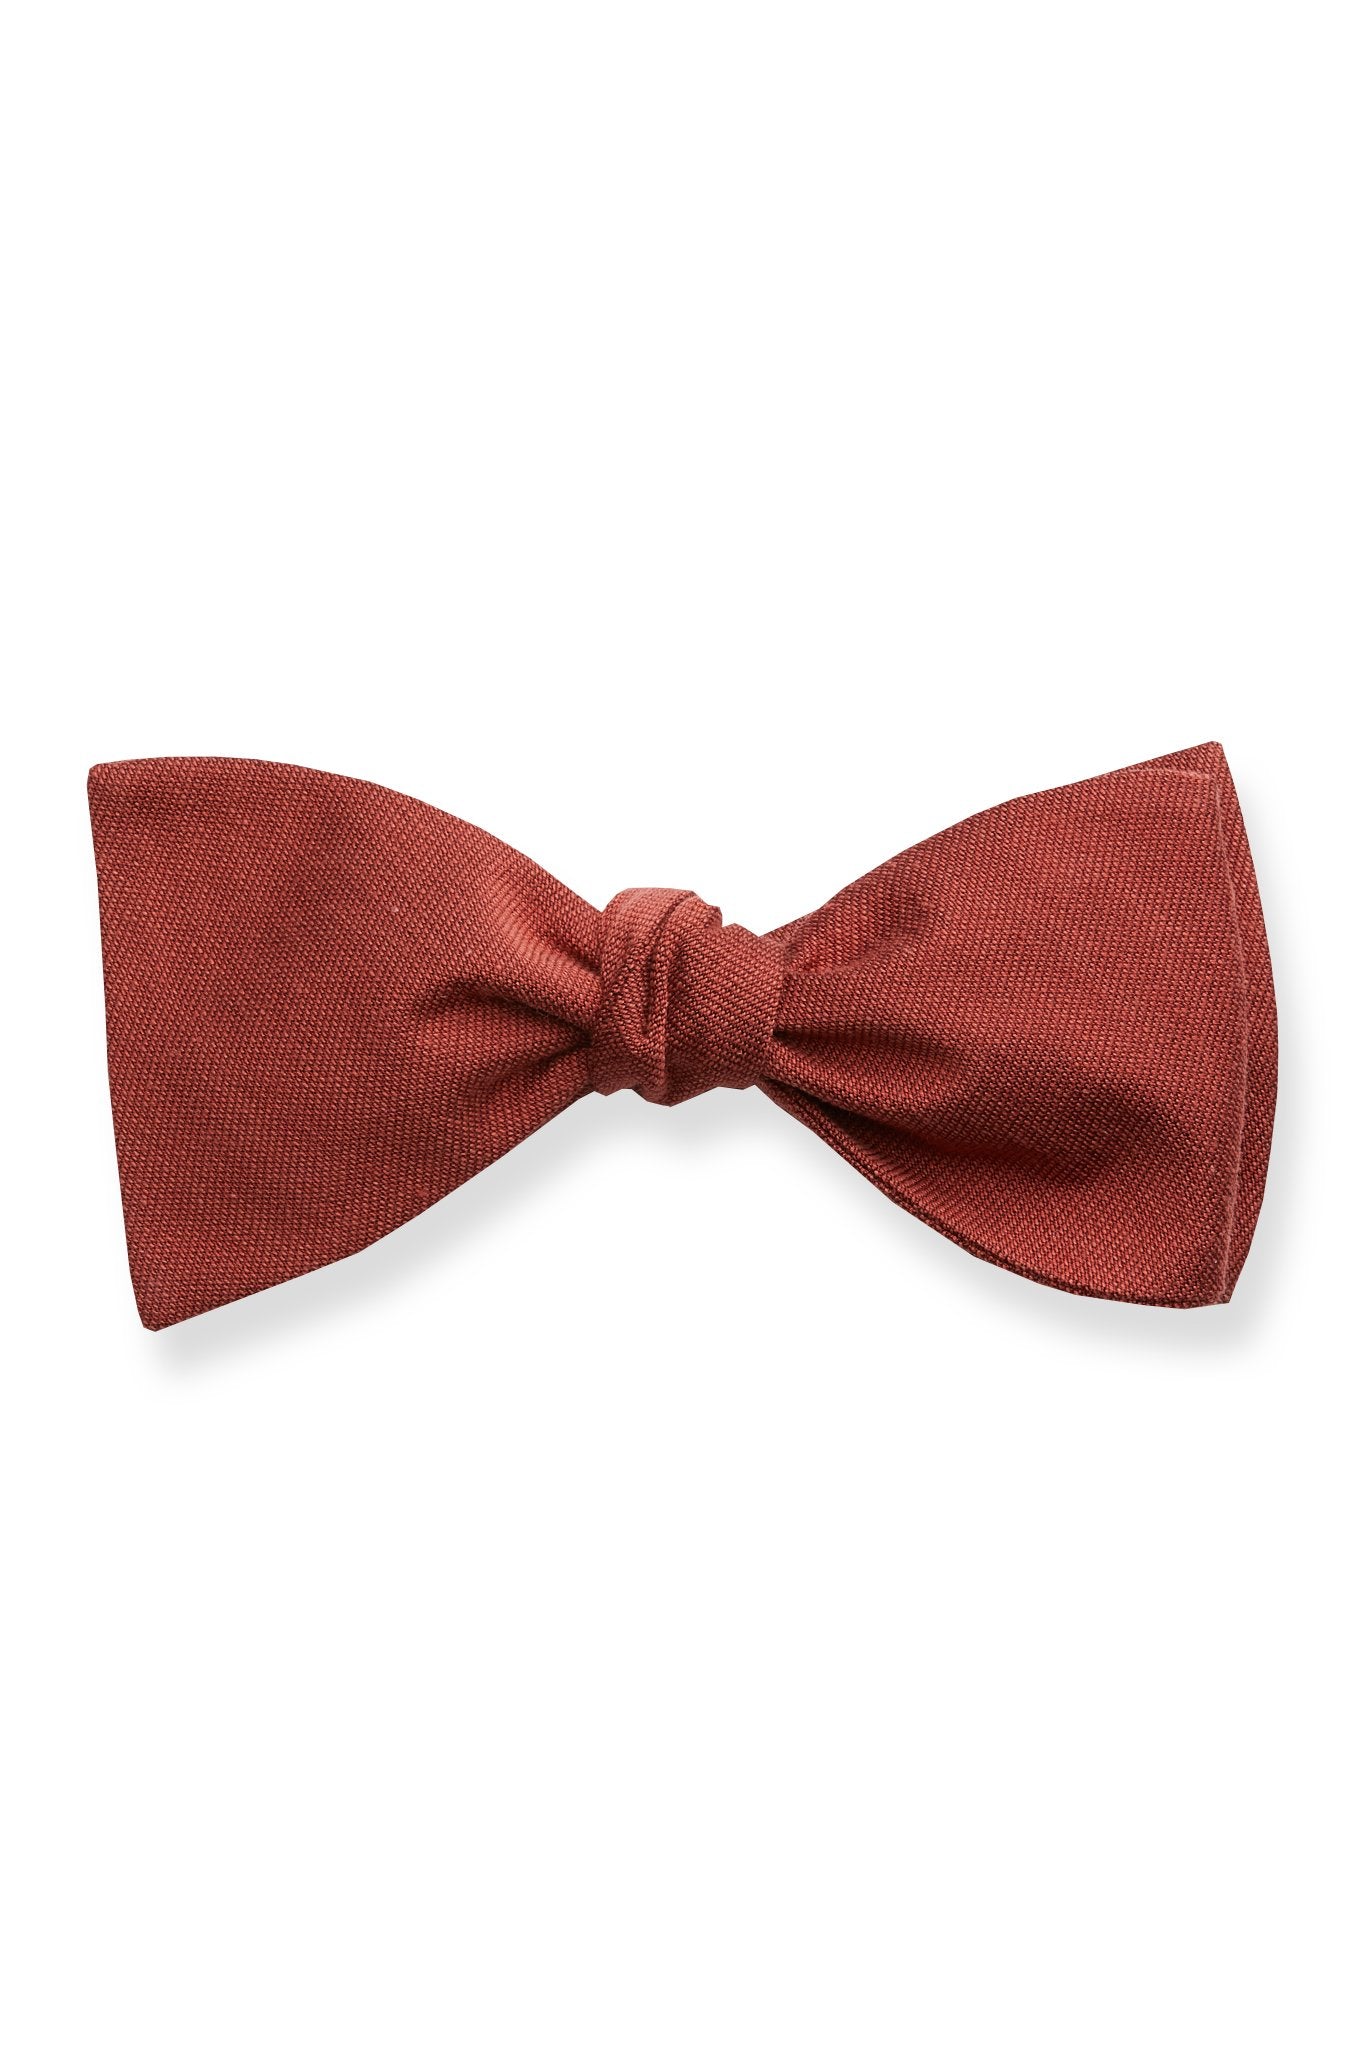 Daniel Bow Tie in spice by Birdy Grey, front view